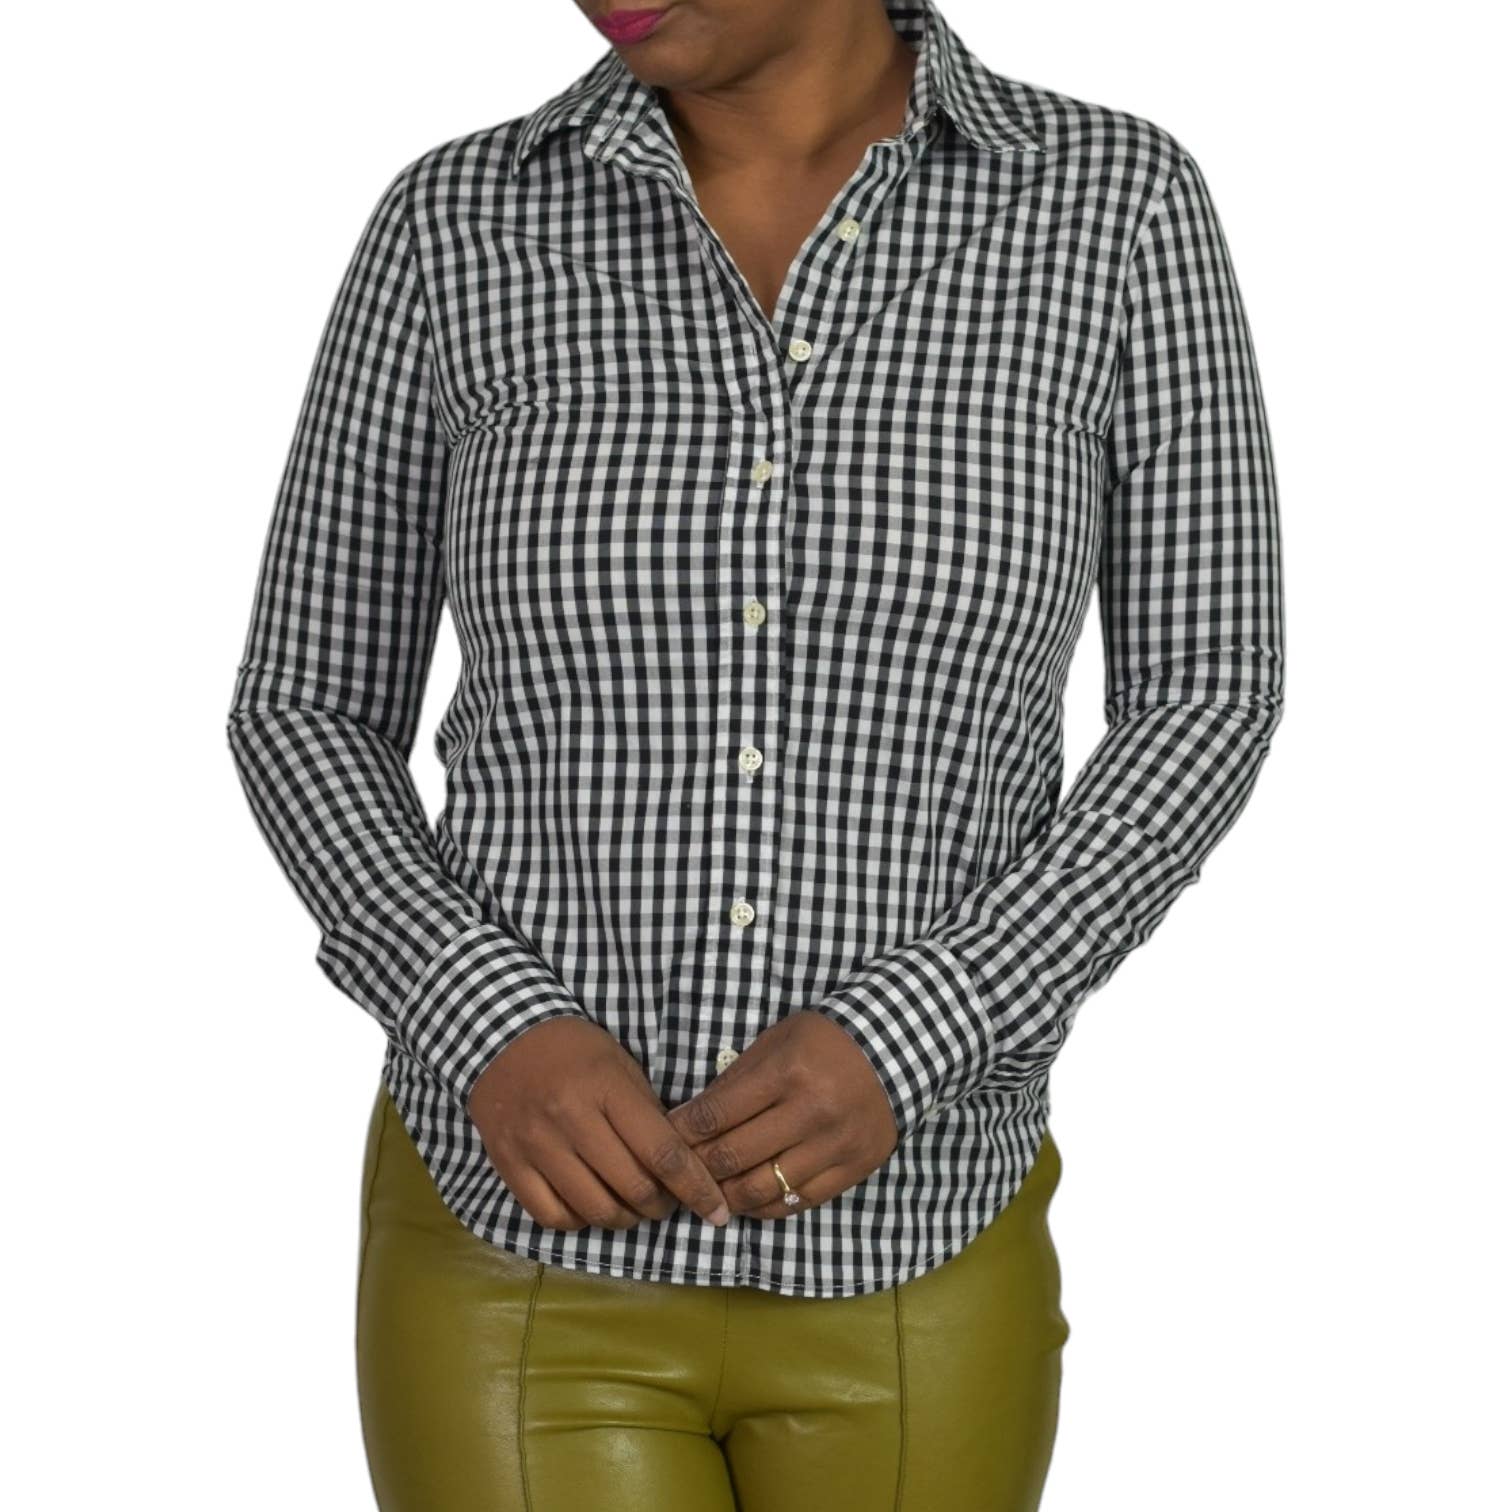 The Shirt Rochelle Behrens Icon Black Check Gingham White Button Front Tailored No Gape Stretch Size XS